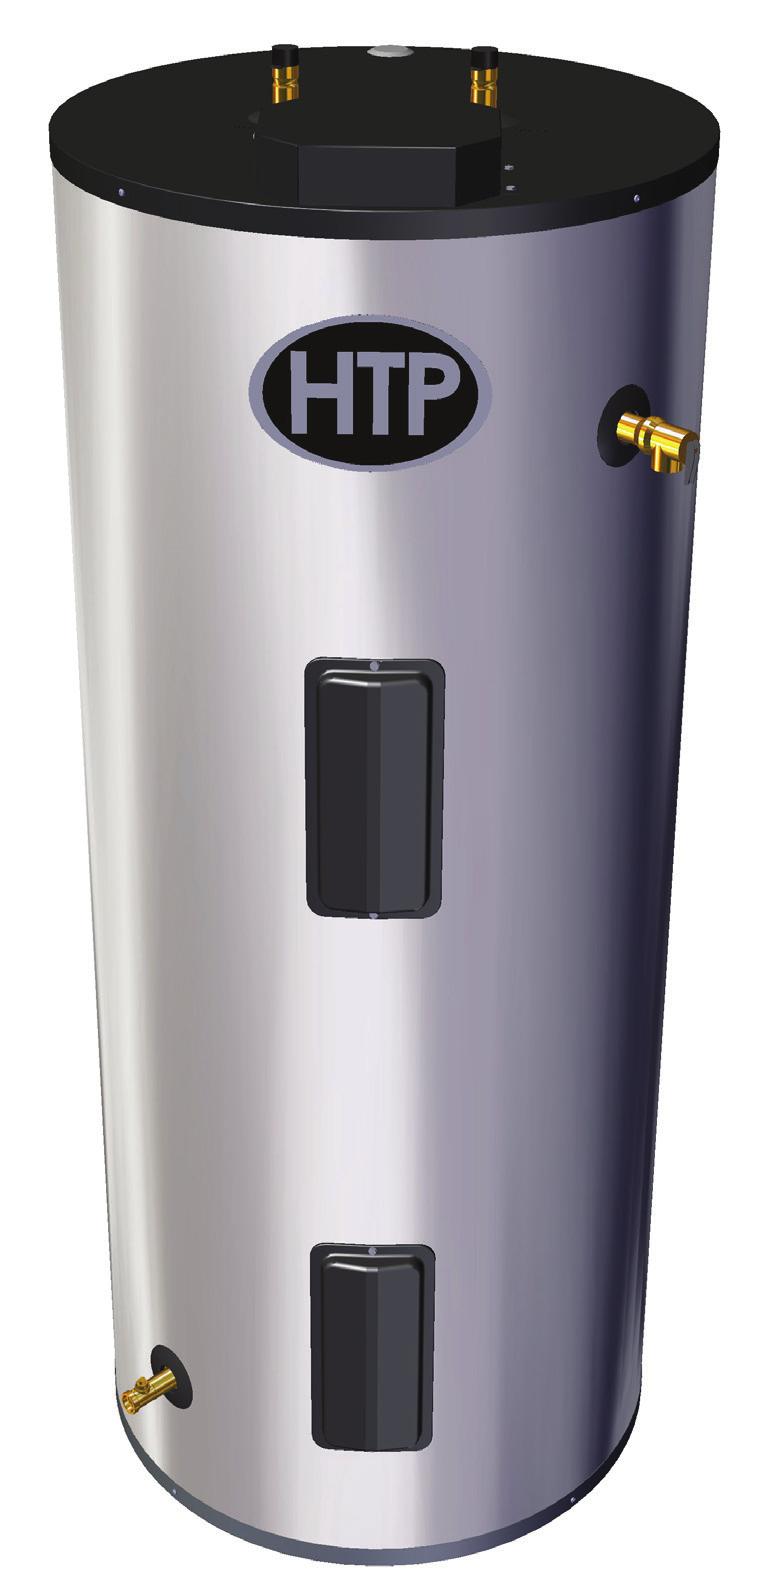 The Everlast Commercial Electric Water Heater combines high quality stainless steel construction and energy efficient operation, providing long draws of hot water without consuming large amounts of